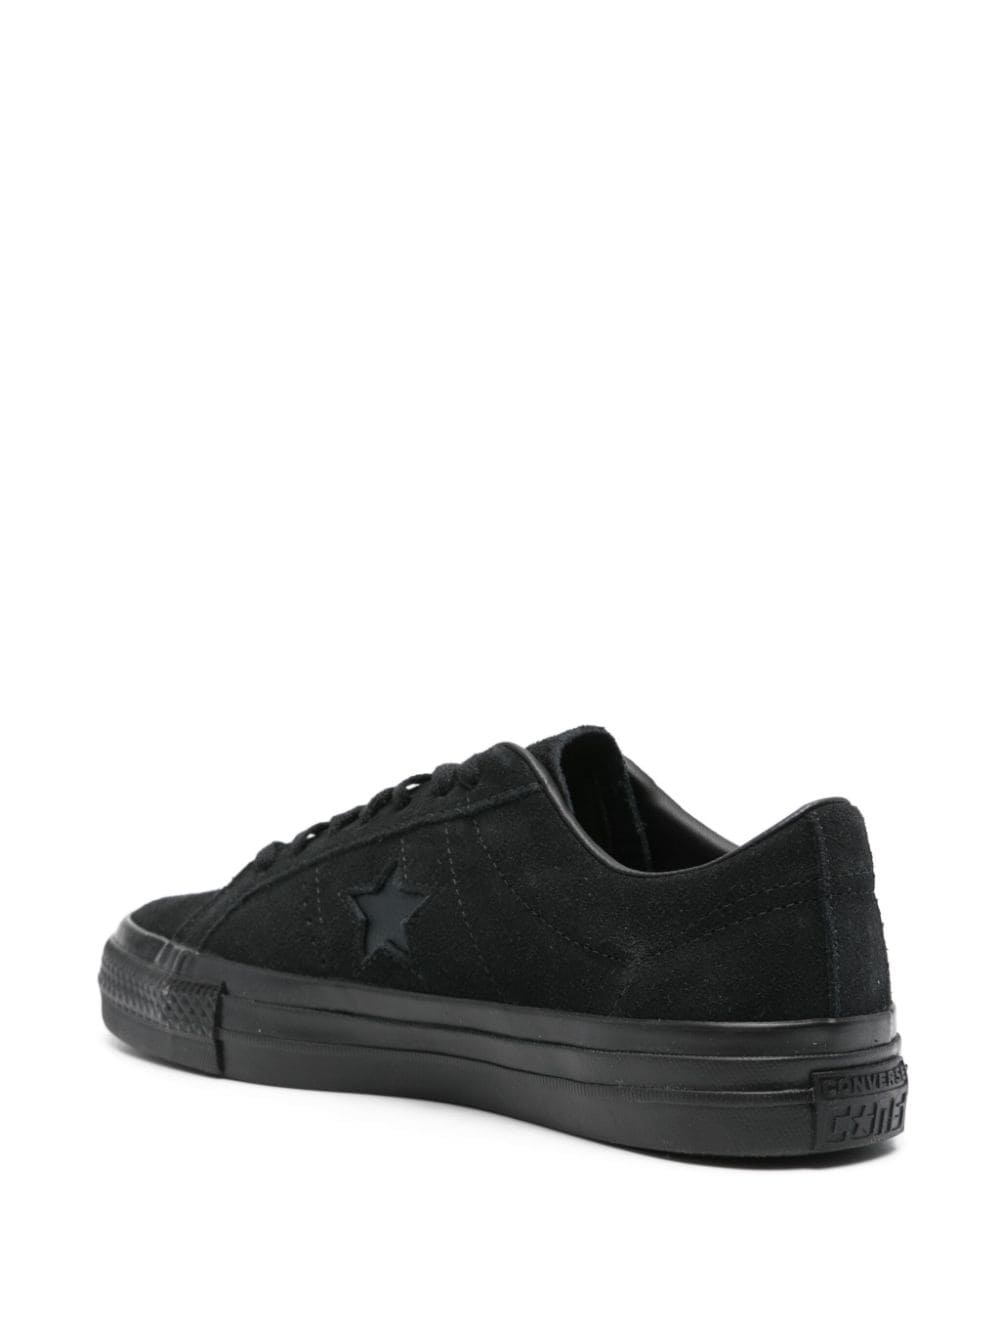 Converse CONVERSE- One Star Pro Ox Sneakers